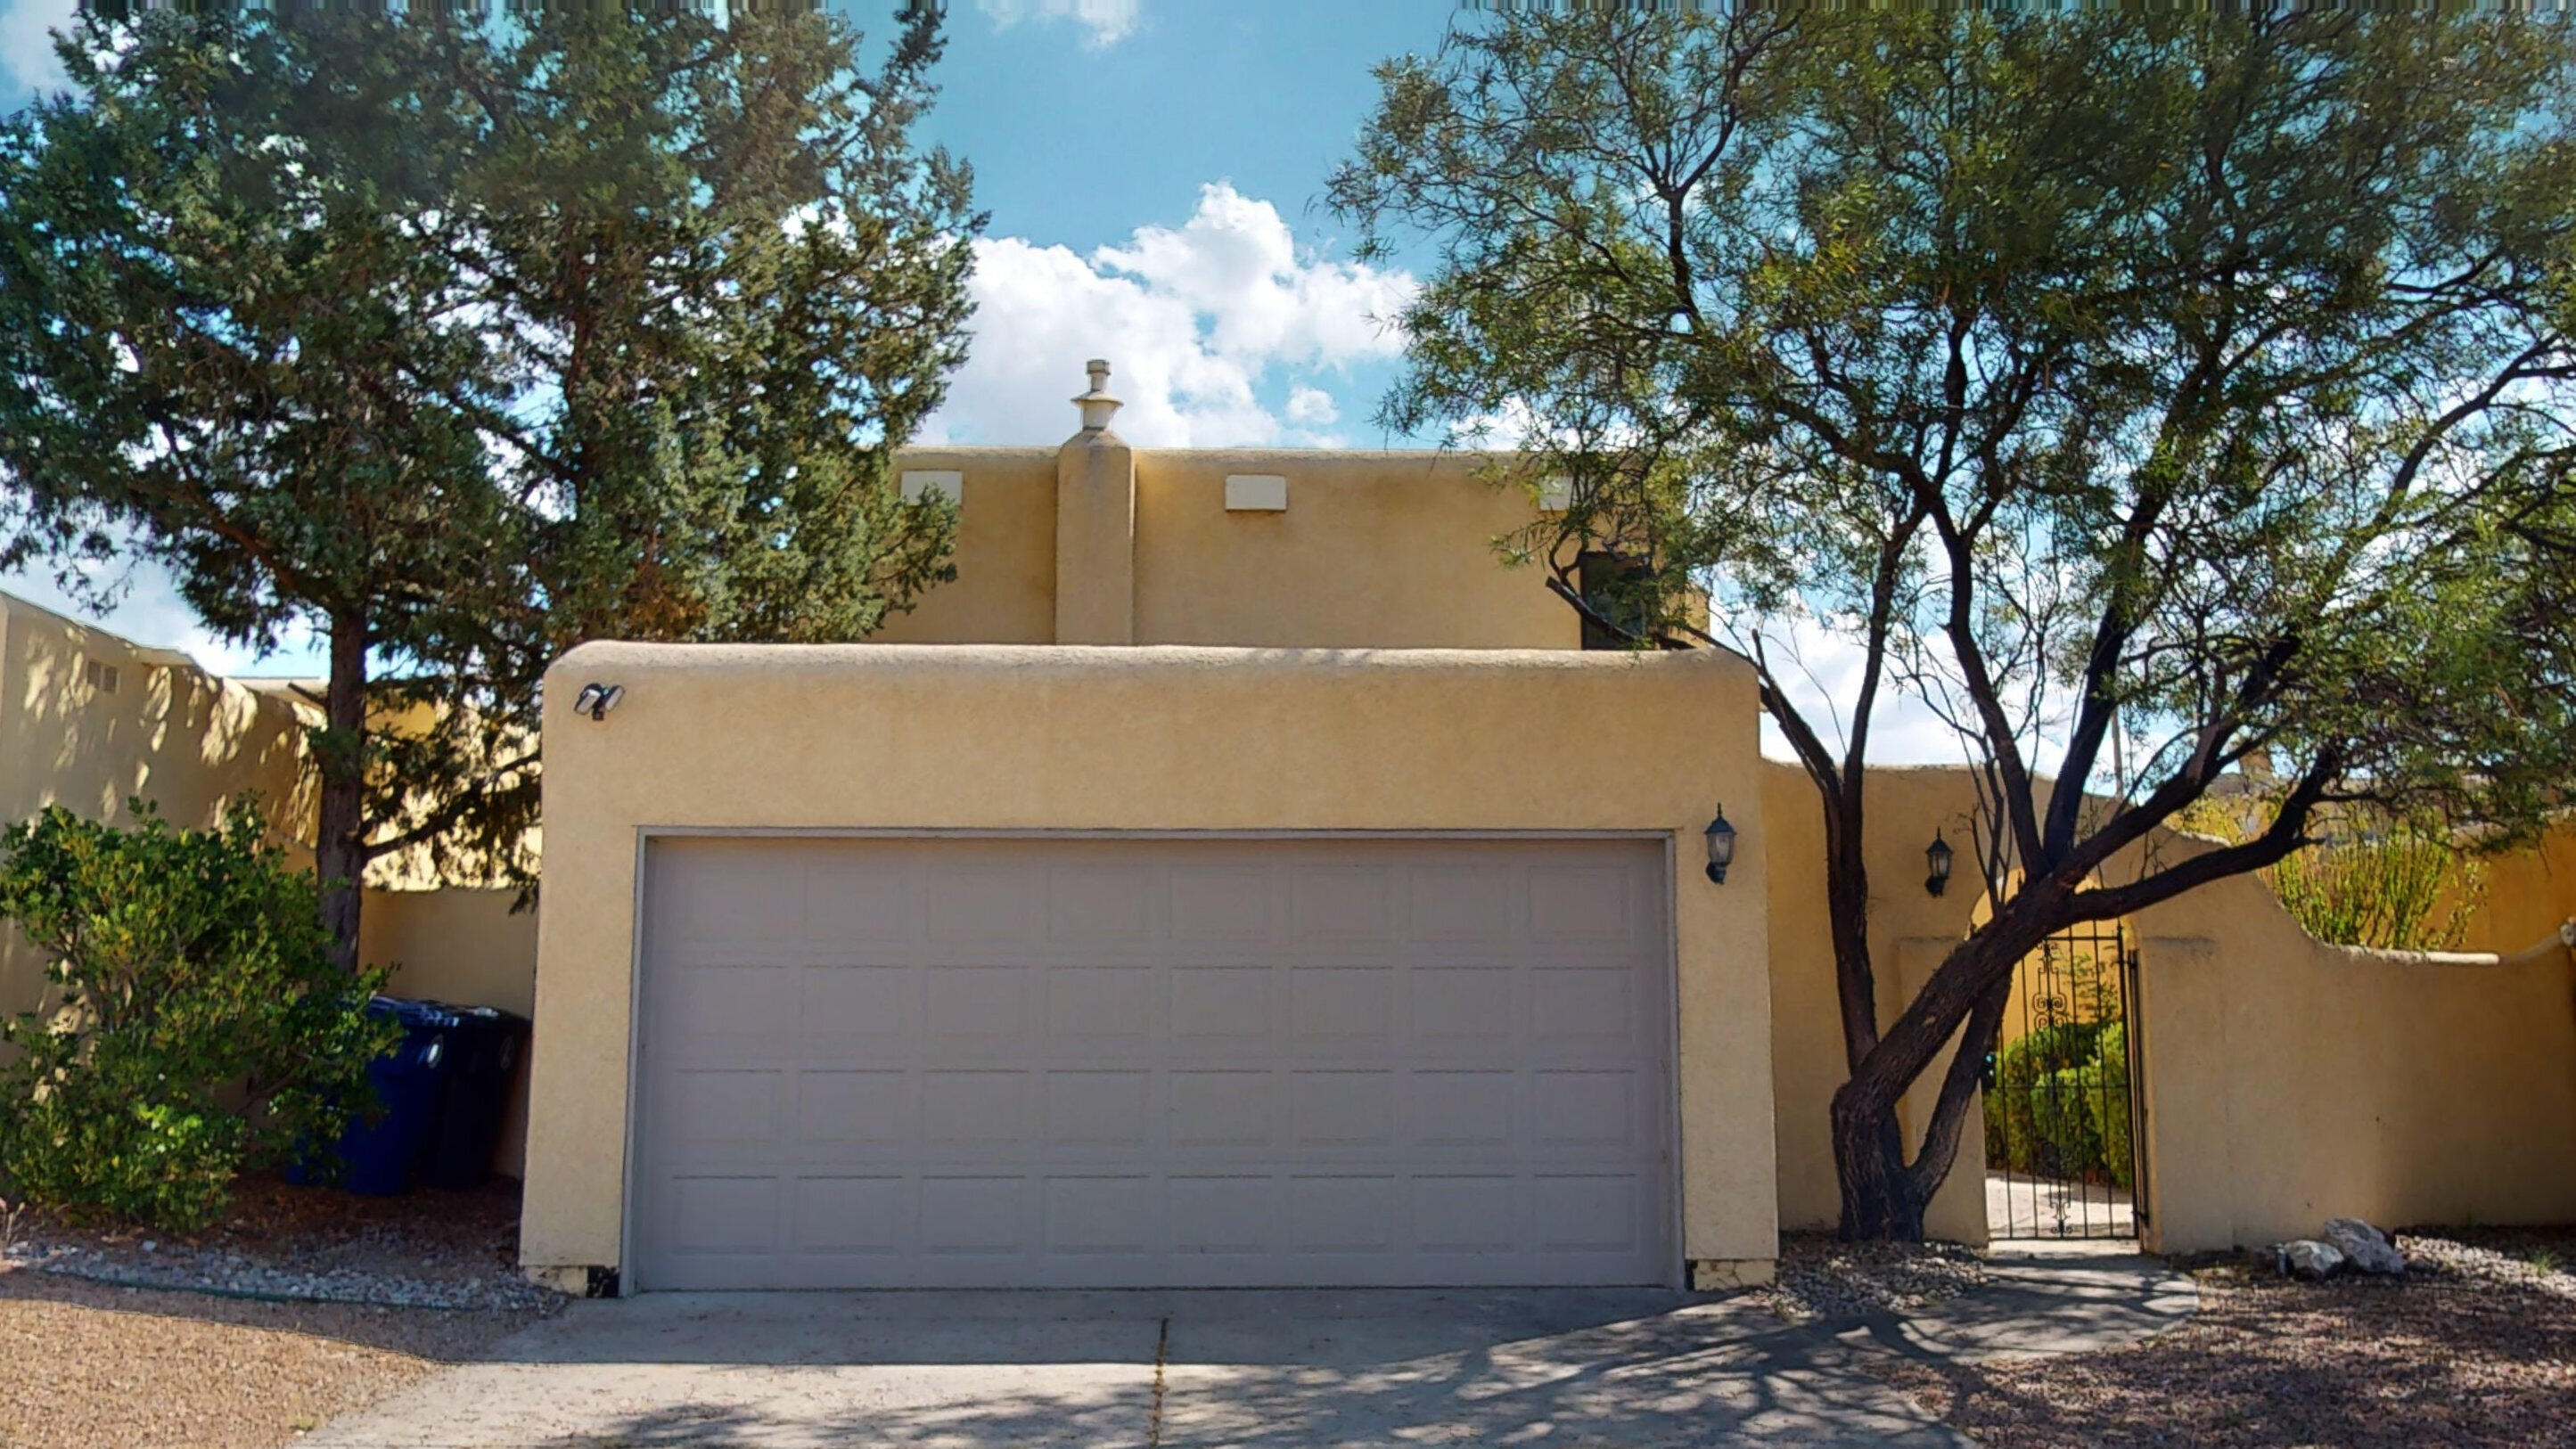 *Open Saturday, 10/8, from 1-3!* Nicely updated home in NE Albuquerque. A charming courtyard greets you as you enter the home with high ceilings in the main living area, porcelain tile, and a cozy fireplace. The remodeled kitchen has a breakfast nook, granite countertops, stainless steel appliances, recessed lighting, and custom cabinets. There is a full bed and bathroom downstairs, with 2 additional rooms and a bathroom upstairs. Fresh paint, newer roof, and finished garage with resurfaced floor.